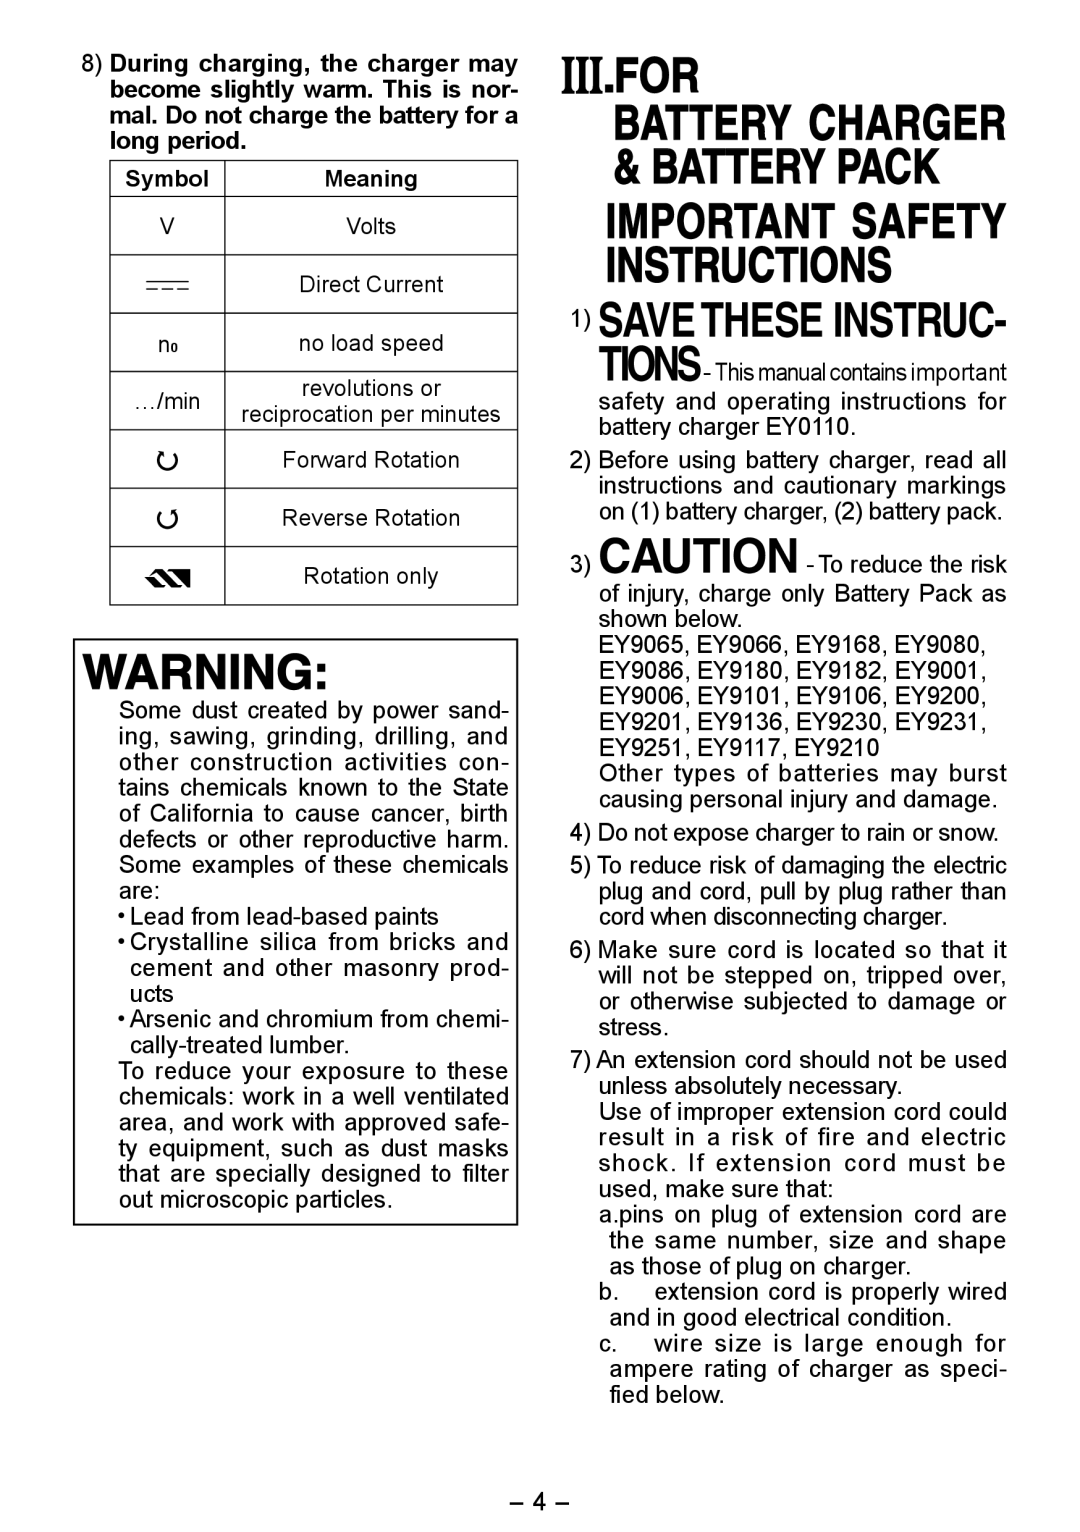 Panasonic EY6450 operating instructions Savethese Instruc, Battery Charger & Battery Pack Important Safety Instructions 